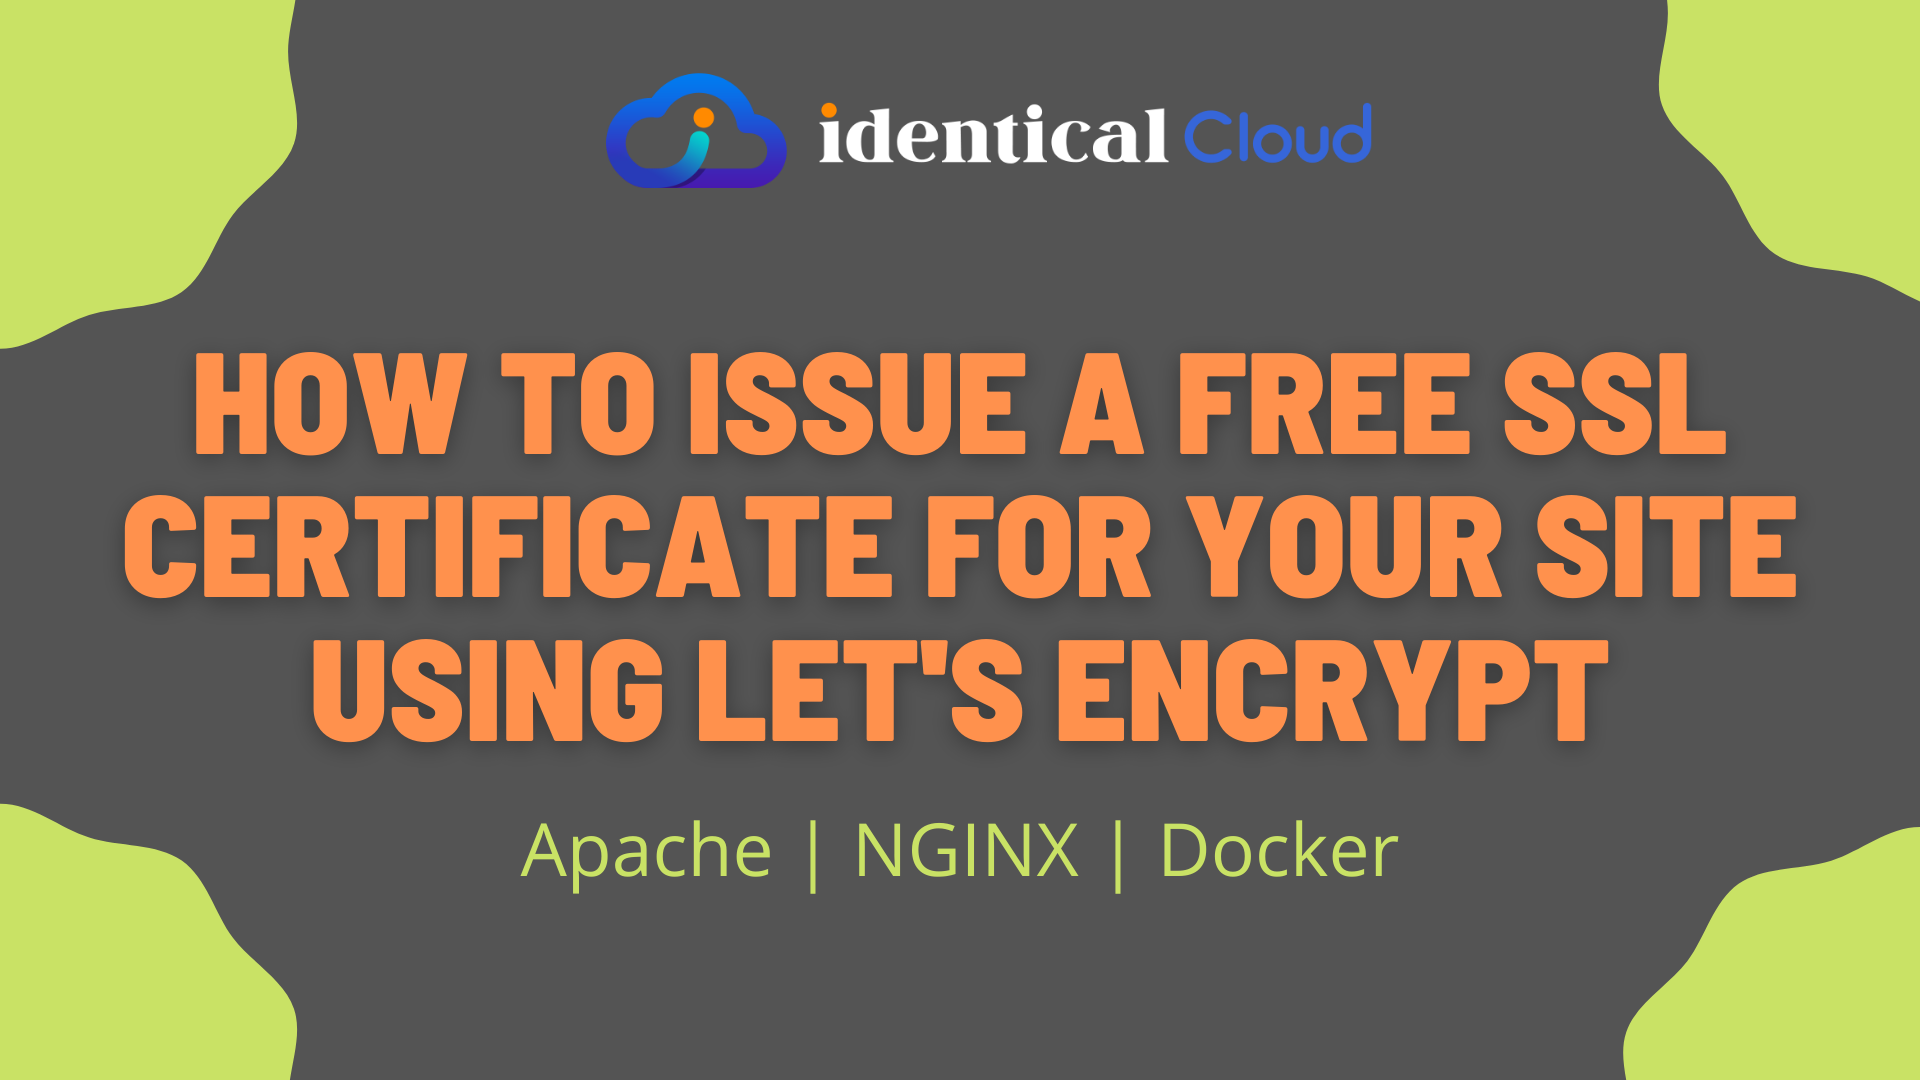 How to issue a free SSL certificate for your site using let's encrypt